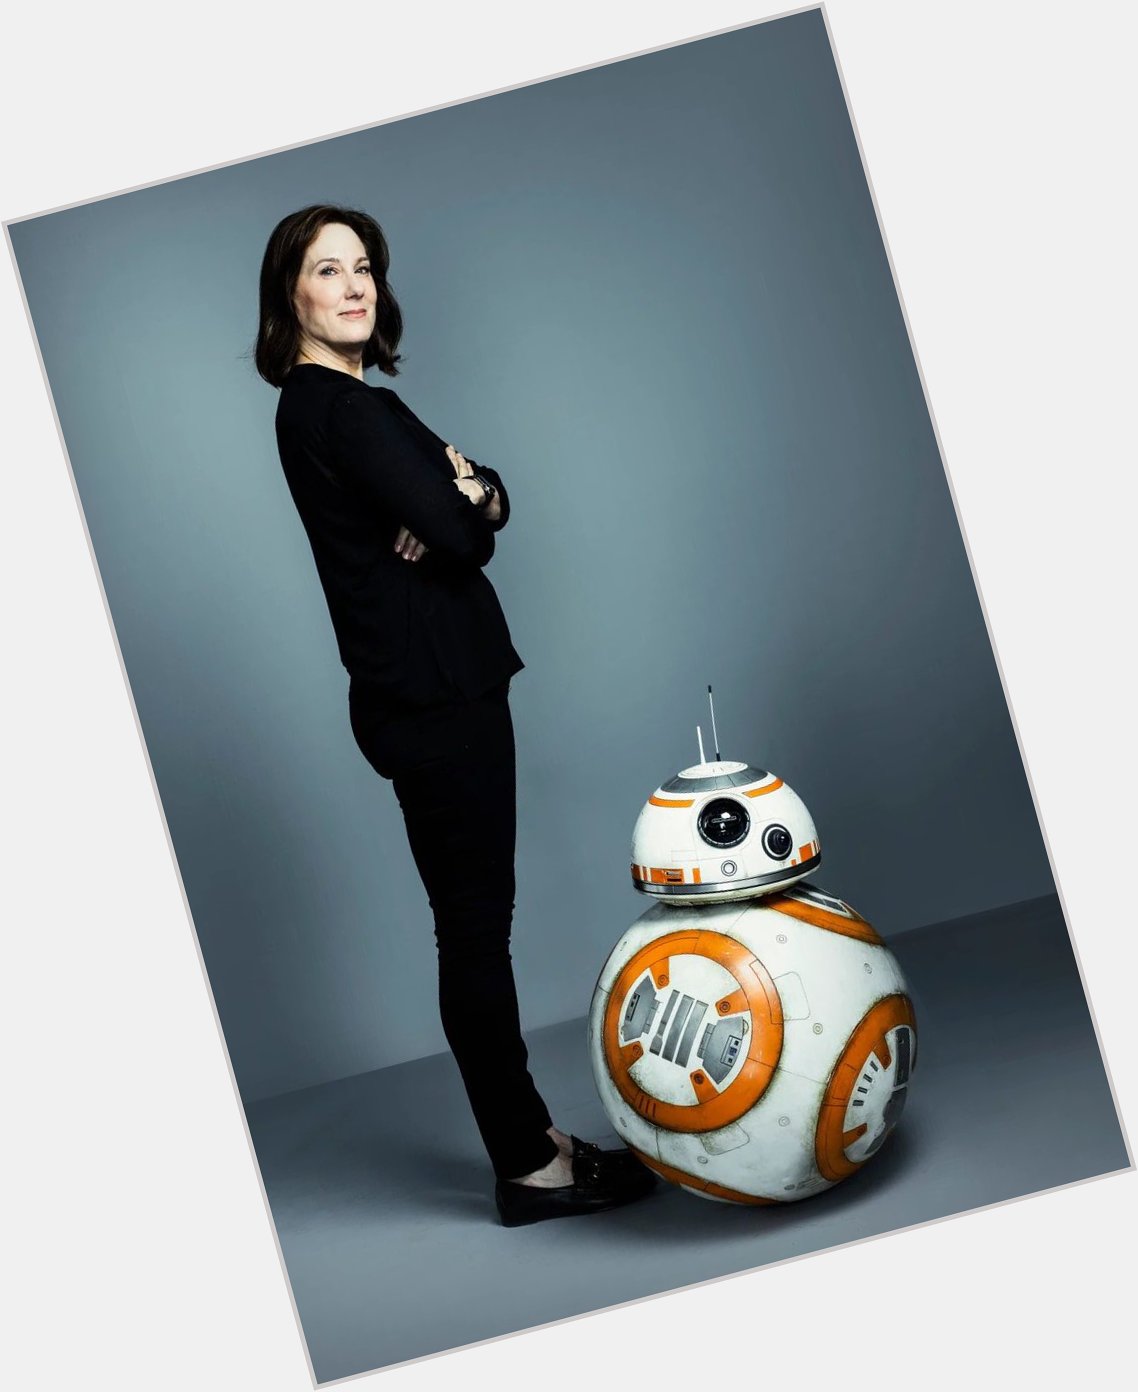 Happy birthday Kathleen Kennedy! Hope one day I can be a bad ass film producer just like you 